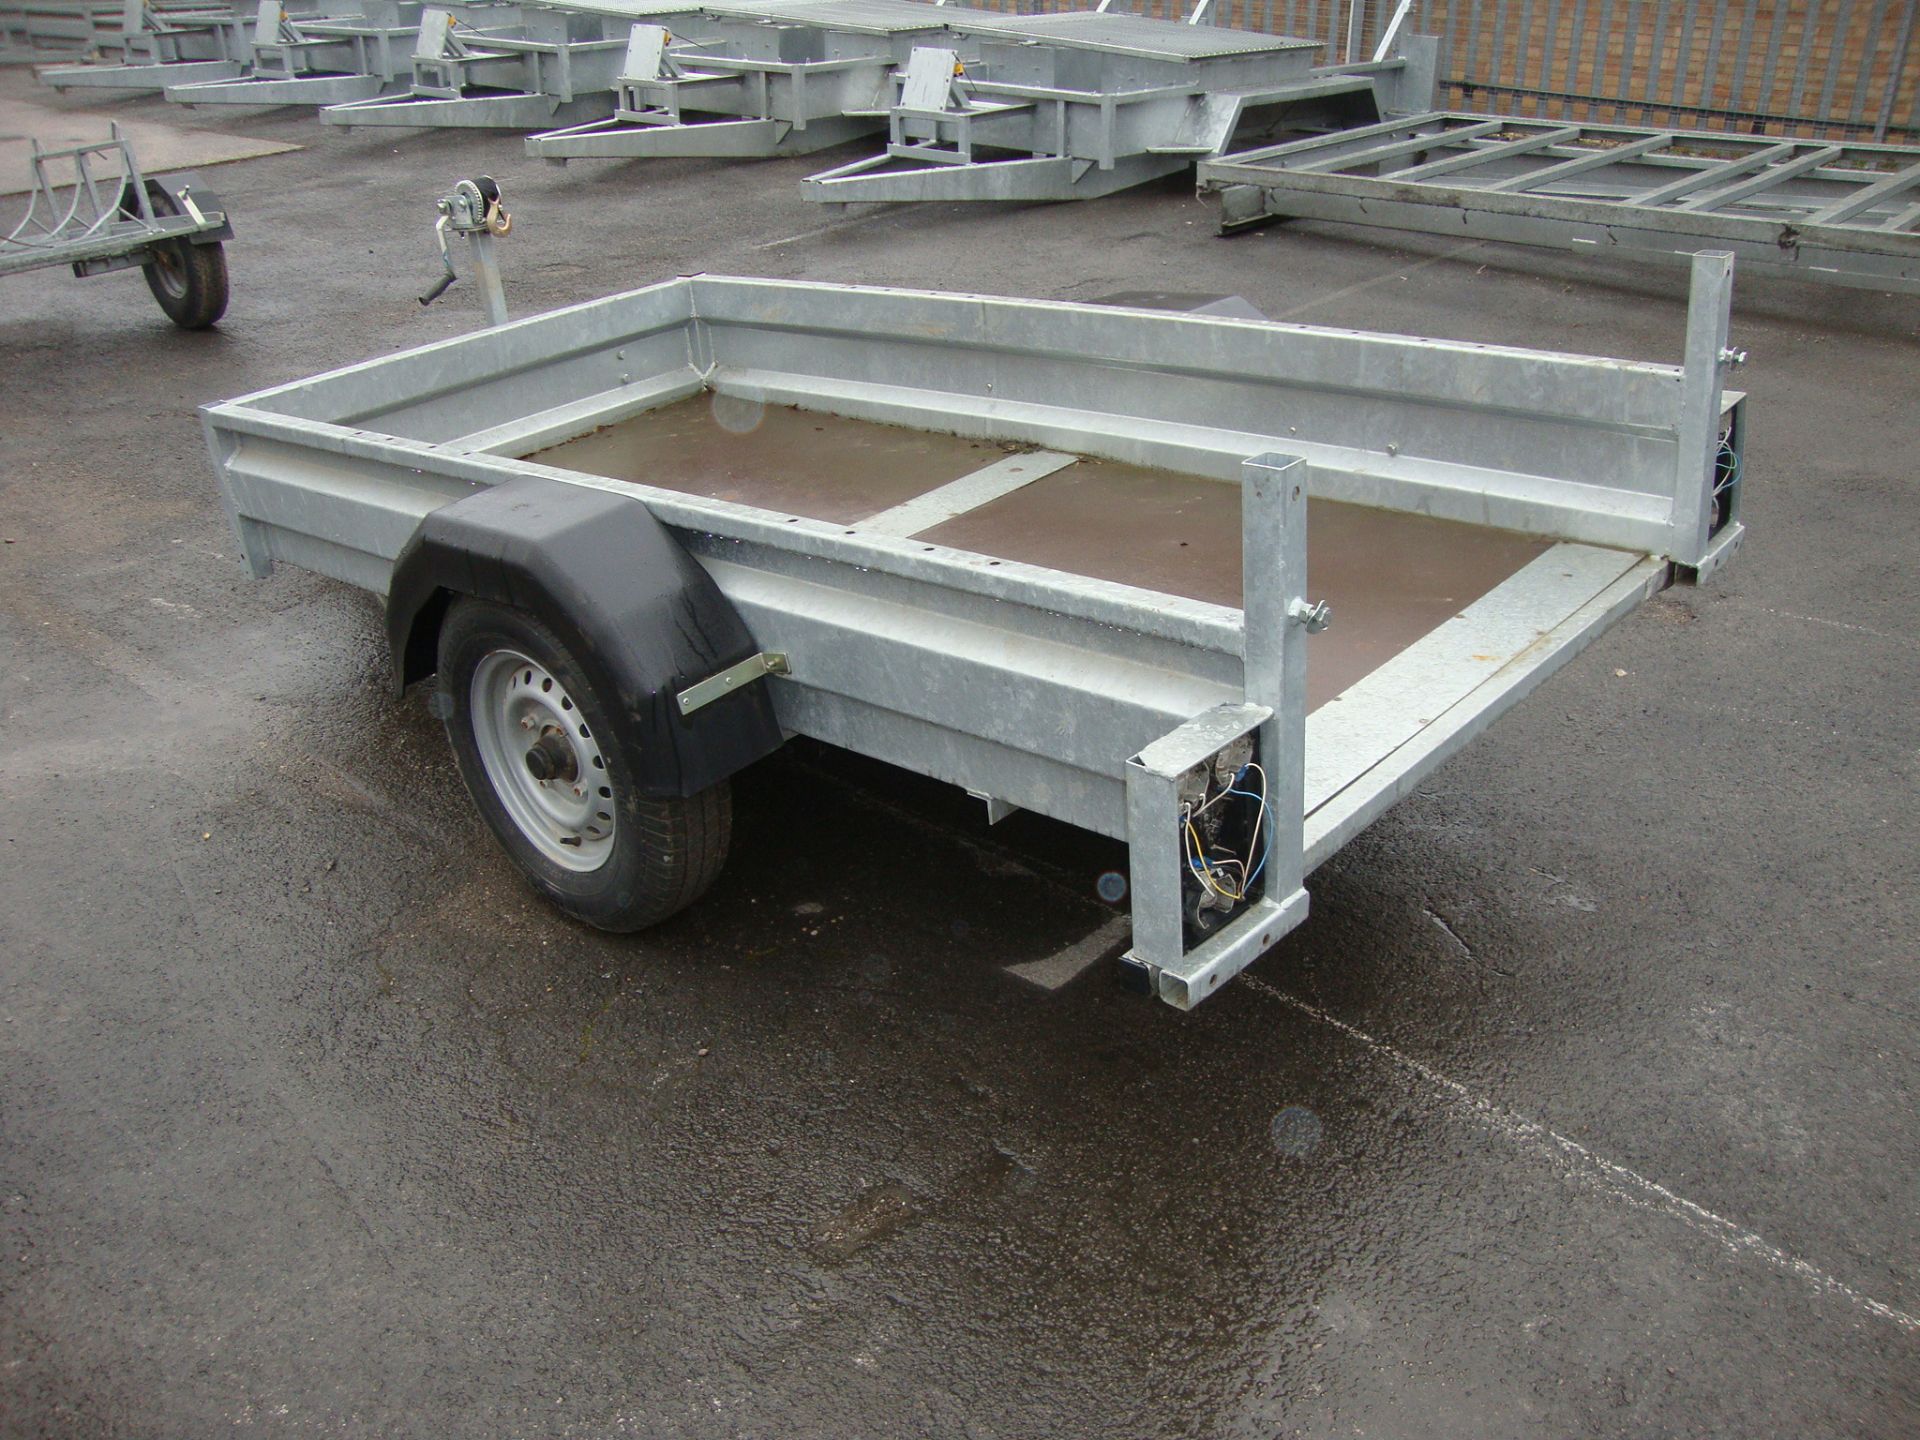 Single axle trailer with open rear (suitable for attaching a small drop down panel or a large ramp), - Image 4 of 7